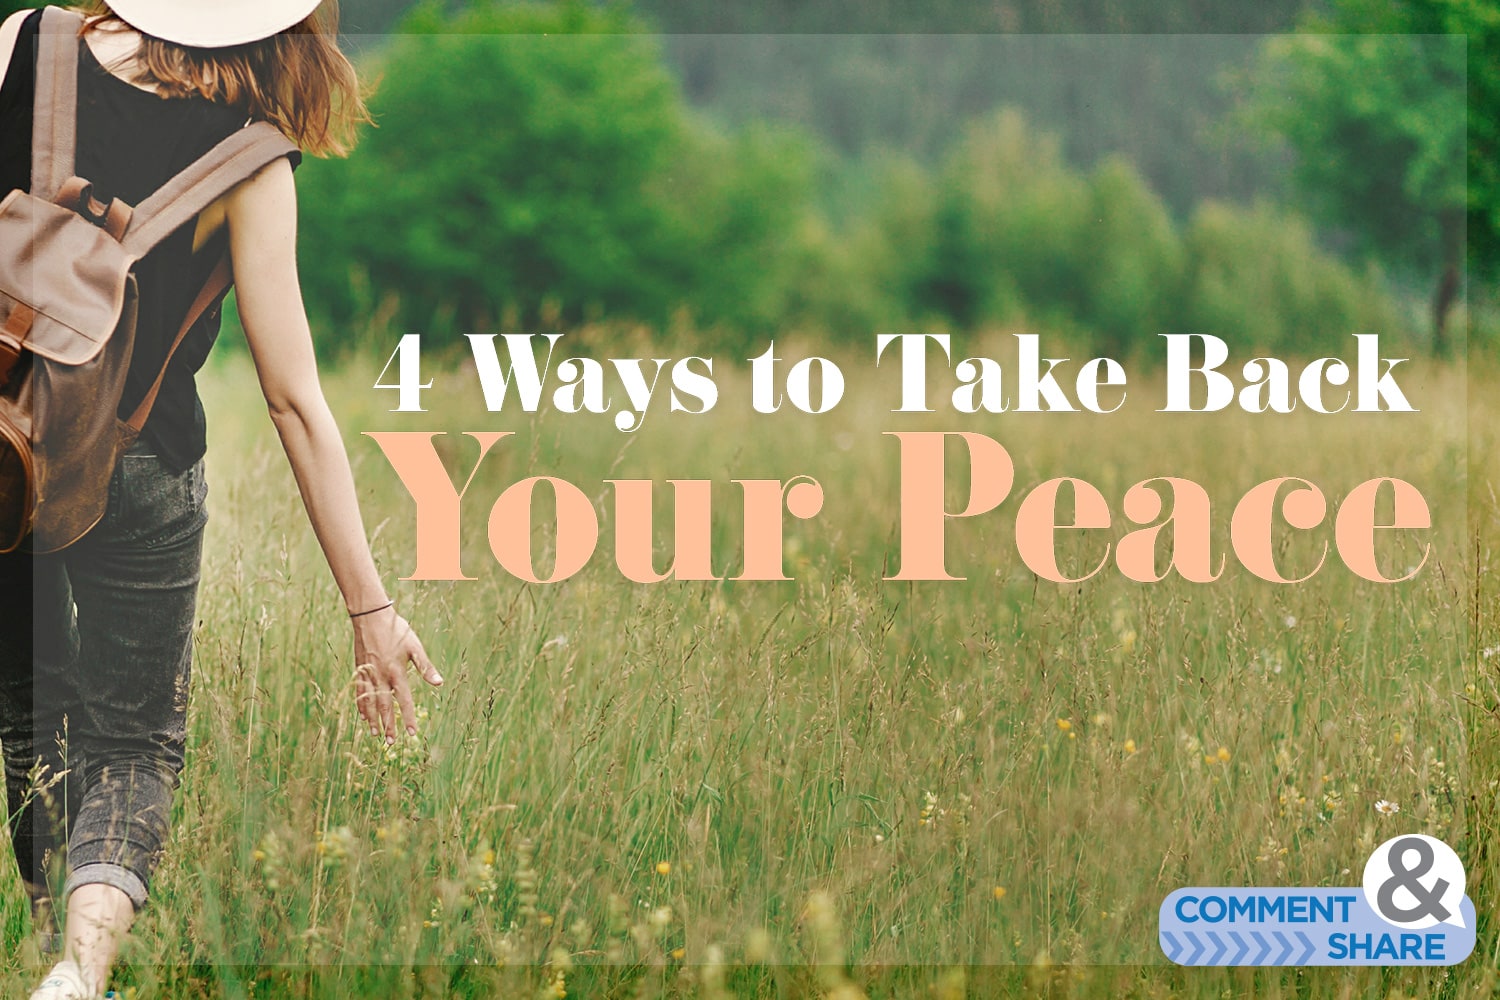 4 Ways to Take Back Your Peace